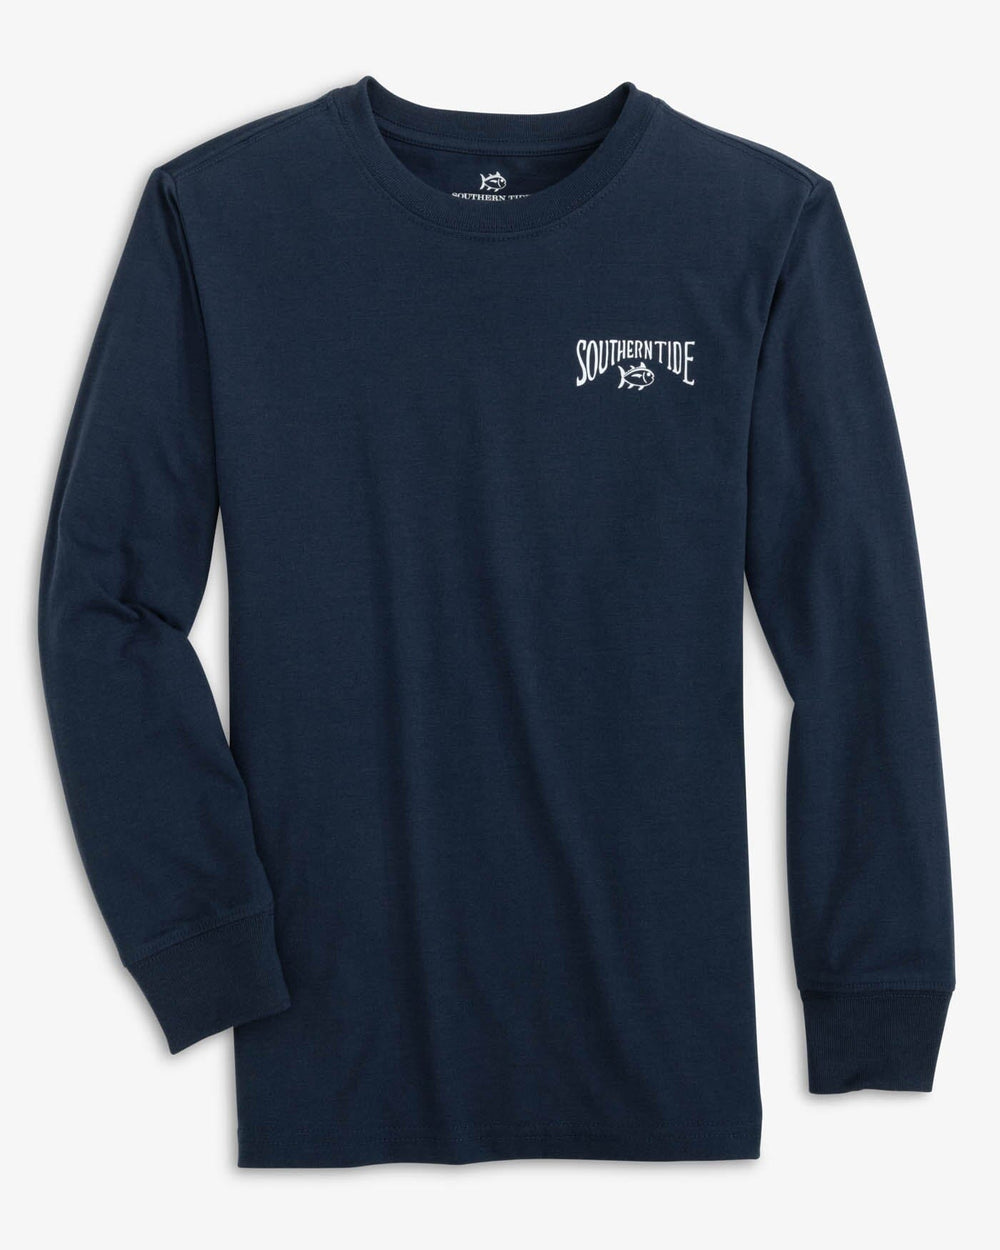 The front view of the Southern Tide Youth Chillin at the Cabin Long Sleeve T-shirt by Southern Tide - True Navy